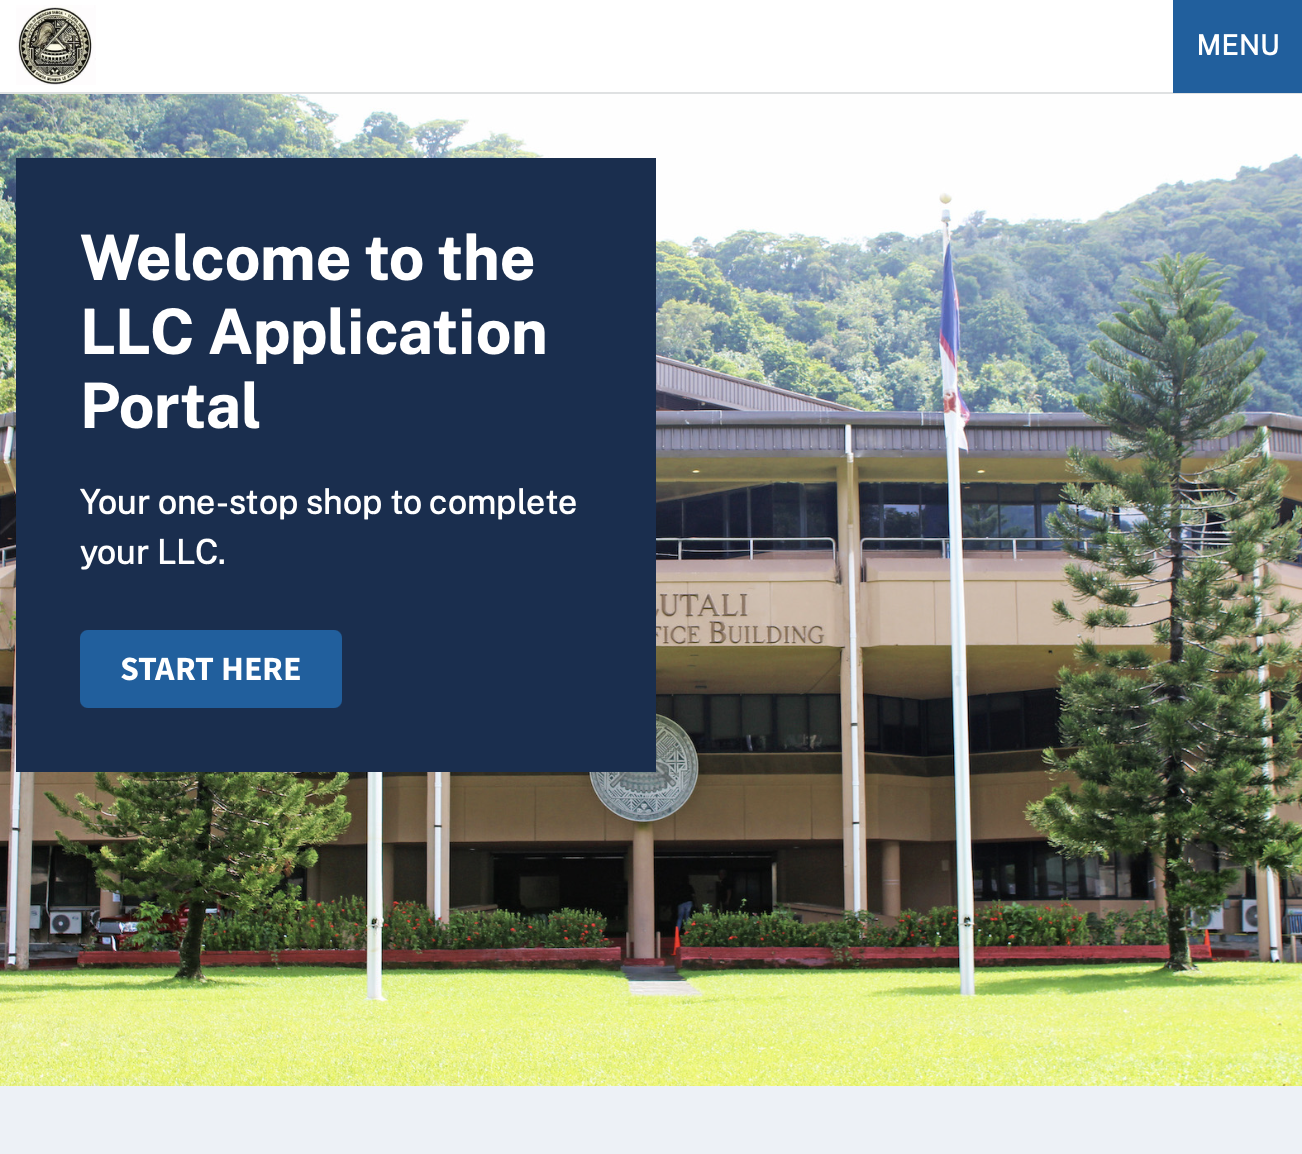 American Samoa LLC Online Portal is Live - Making it Effortless to Create an LLC Regardless of The Business Location